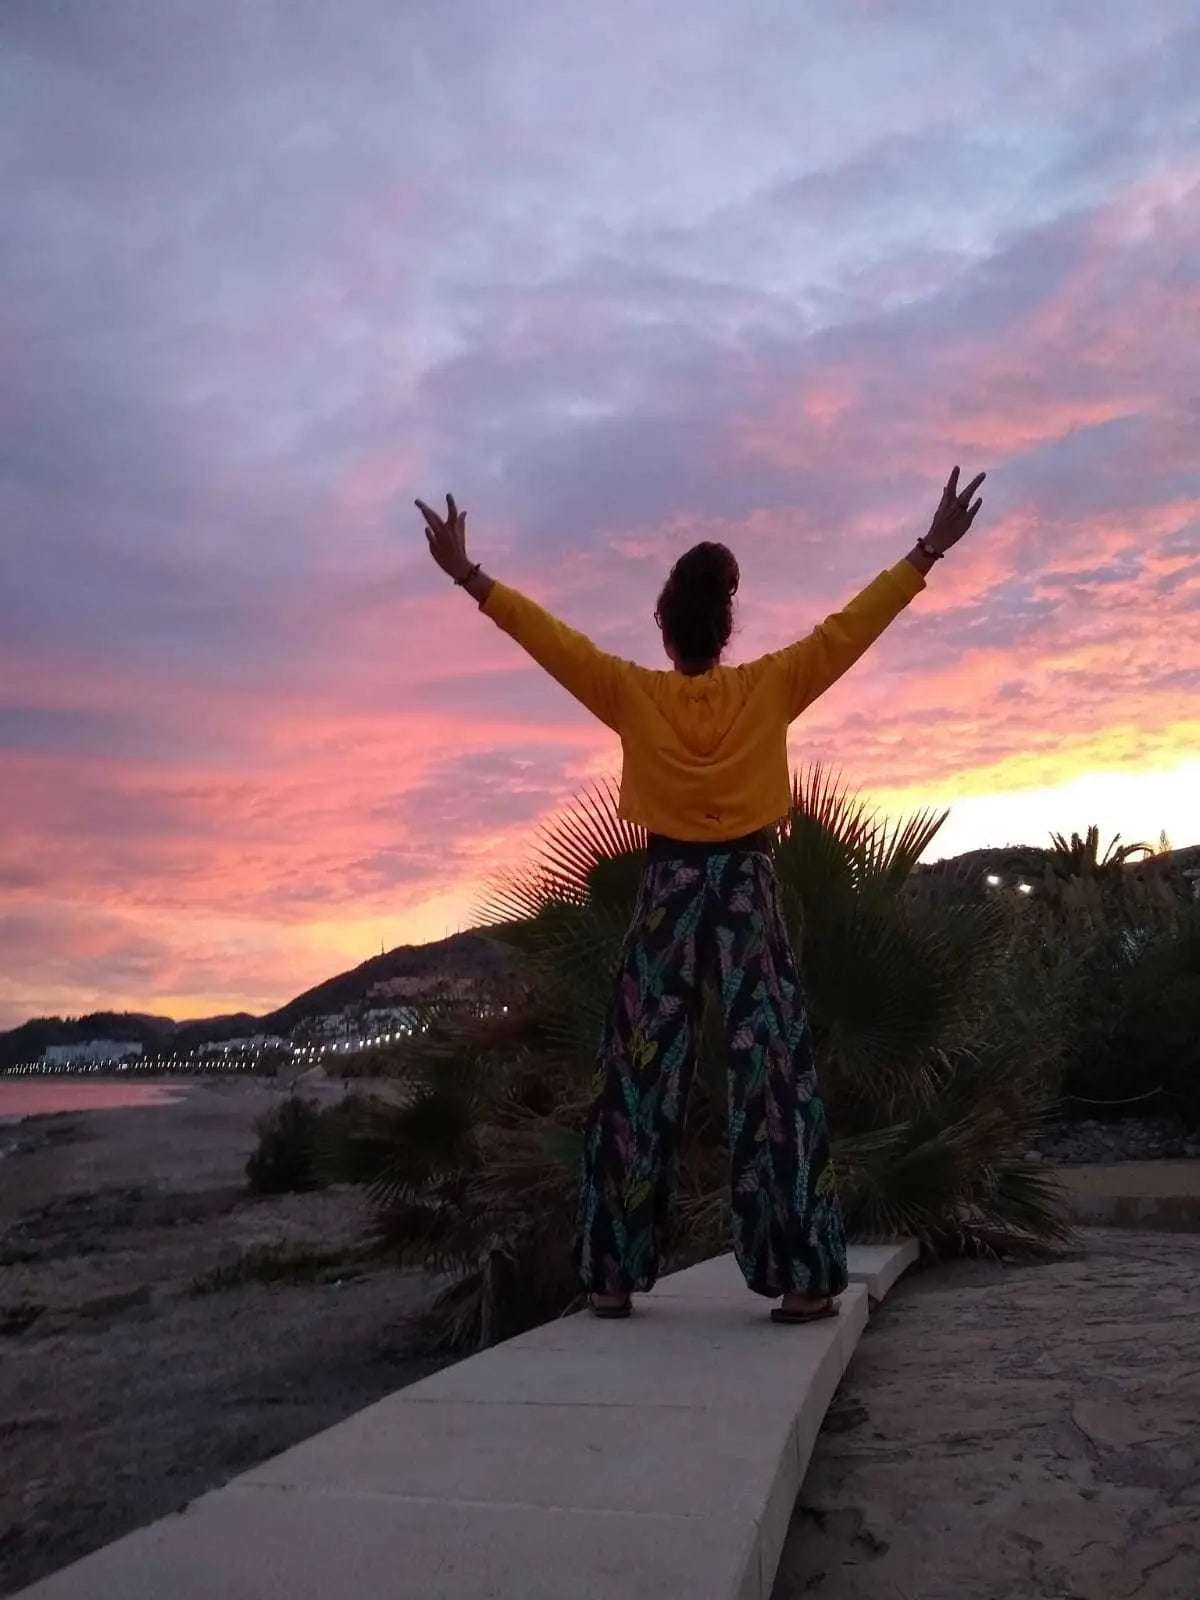 Mindful Luxury Retreat 2024 - 5 days self-care Andalucia
4pm Monday October 7th until 12 noon Friday October 11th
Four nights, superior half board at The Parador Hotmindfulism®Mindful Luxury Retreat 2024 - mindfulism®